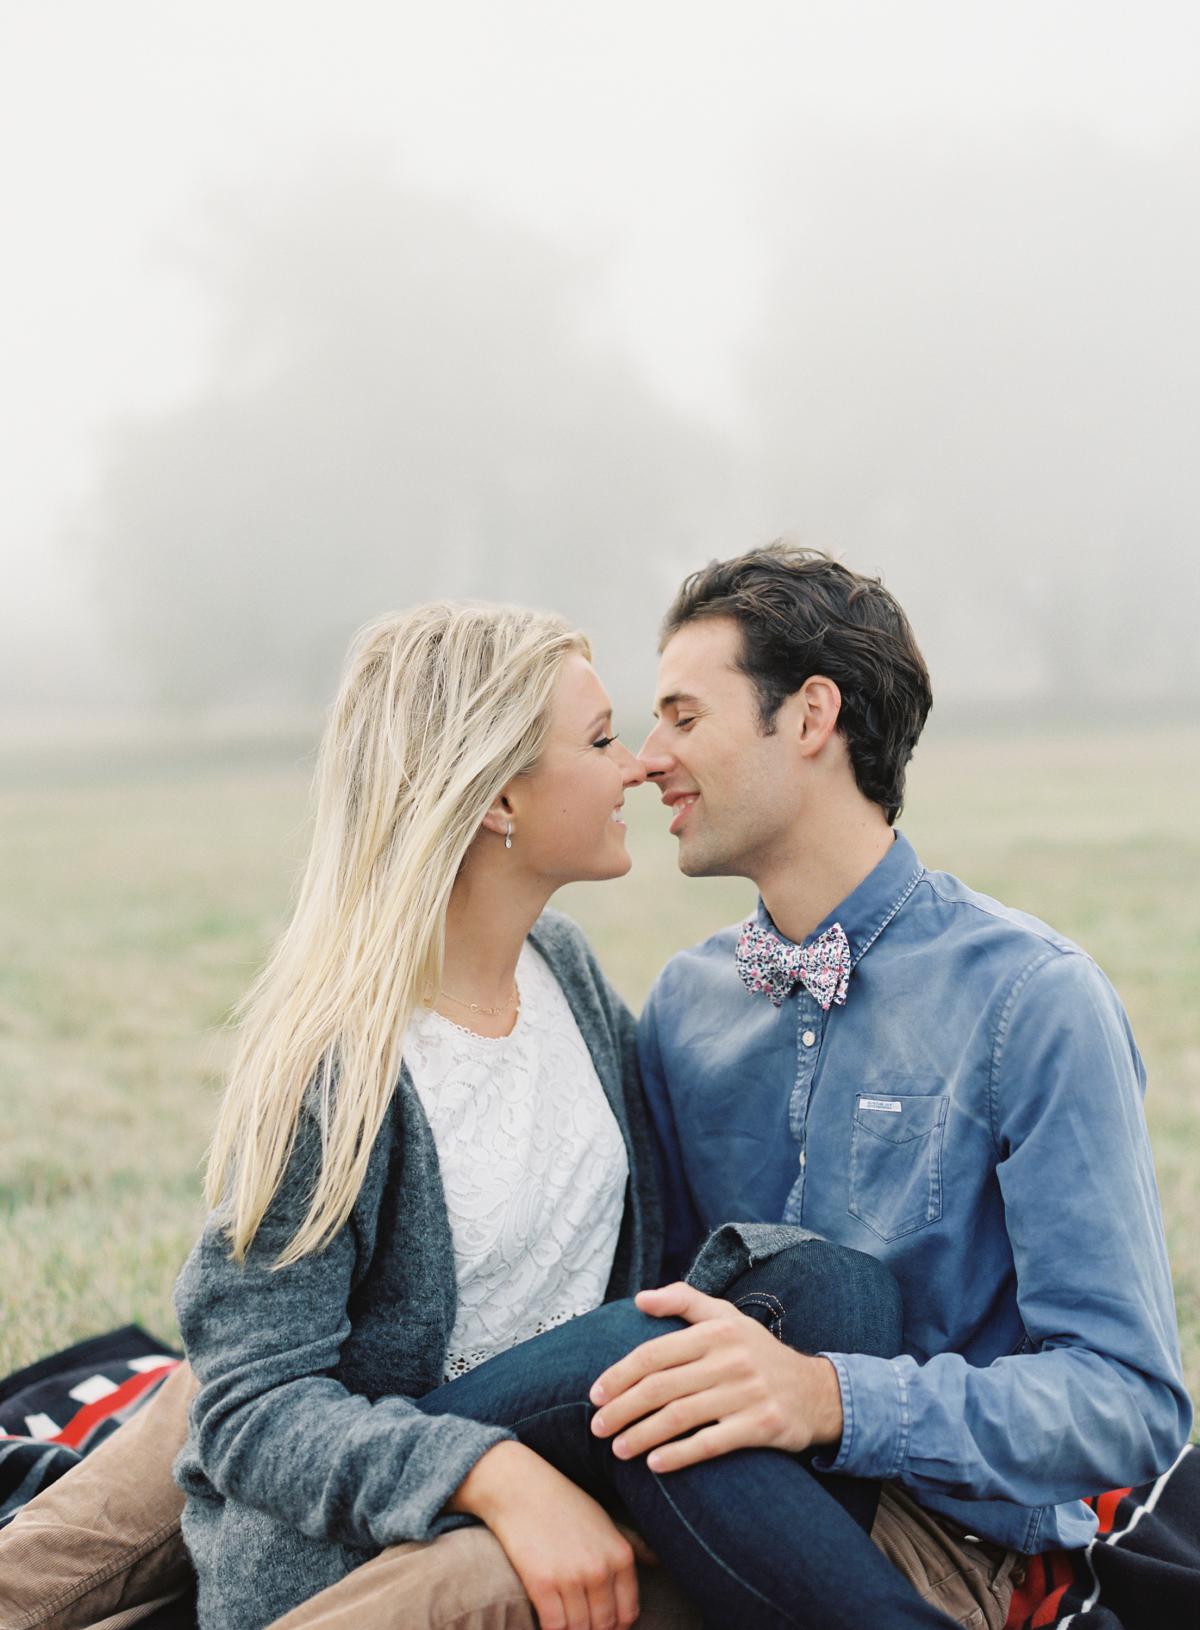 Foggy seattle engagement session by omalley photographers 0008